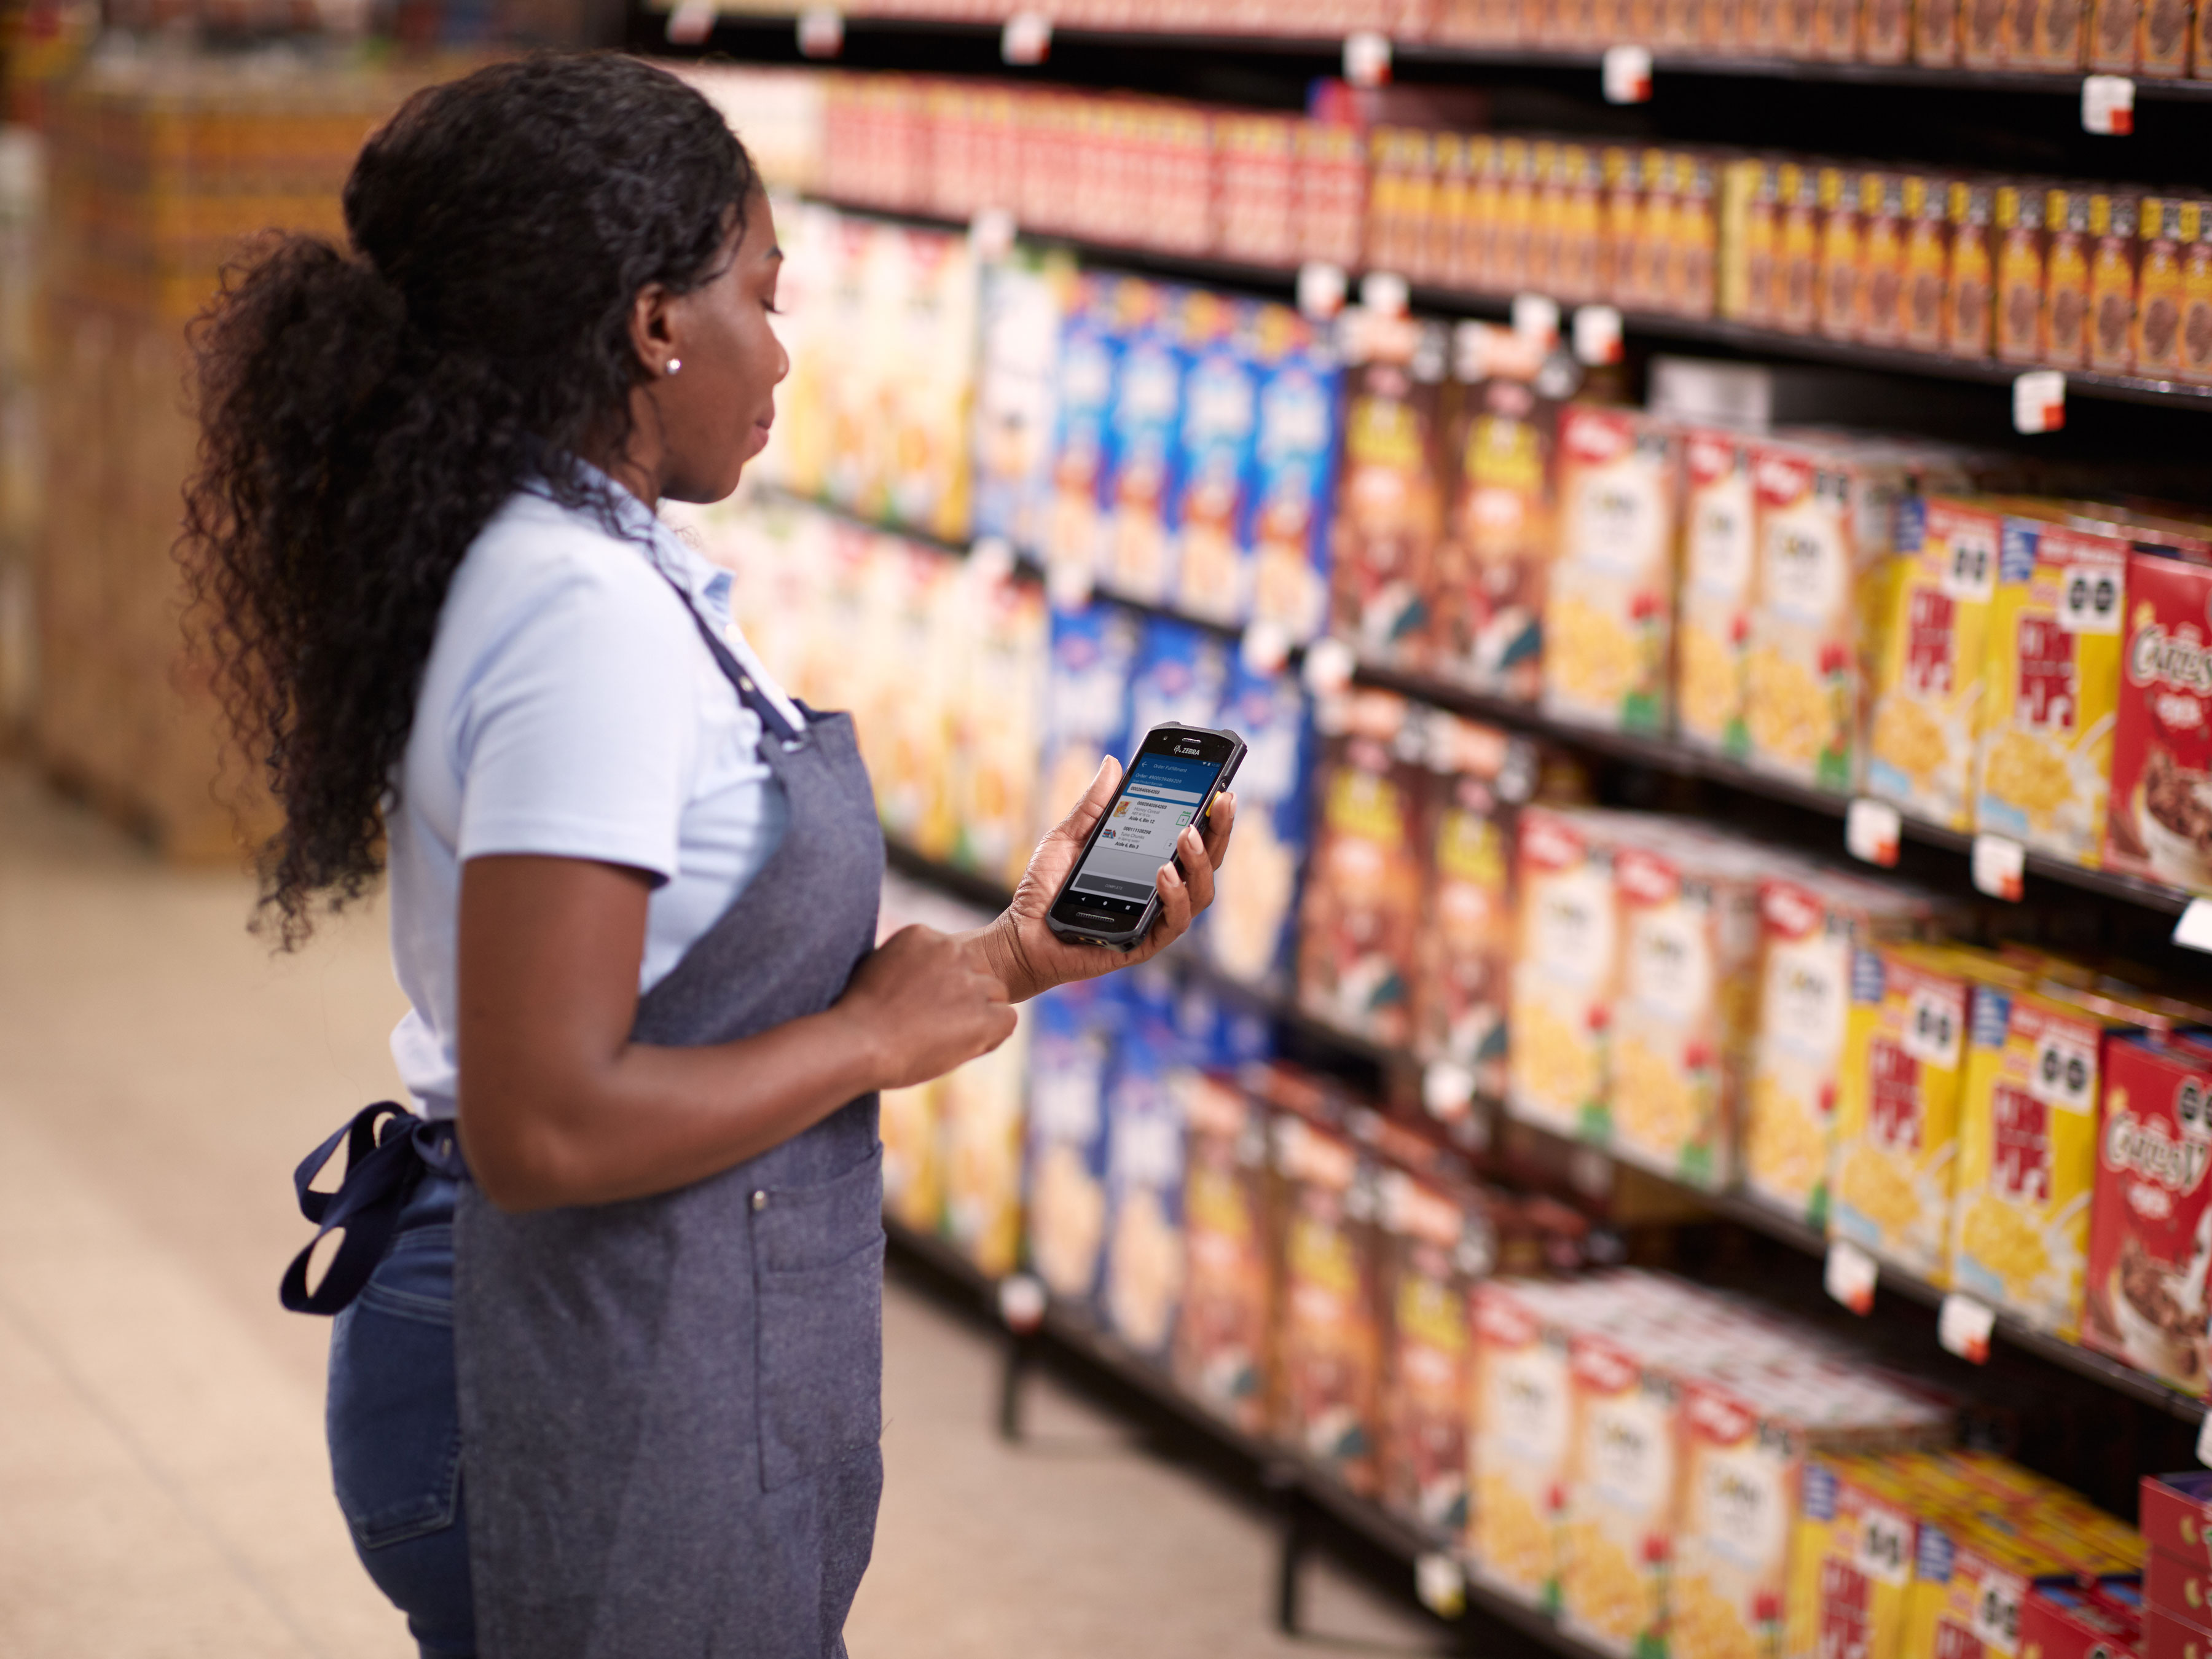 Grocery store associate using the Zebra TC21 handheld mobile computer to check inventory